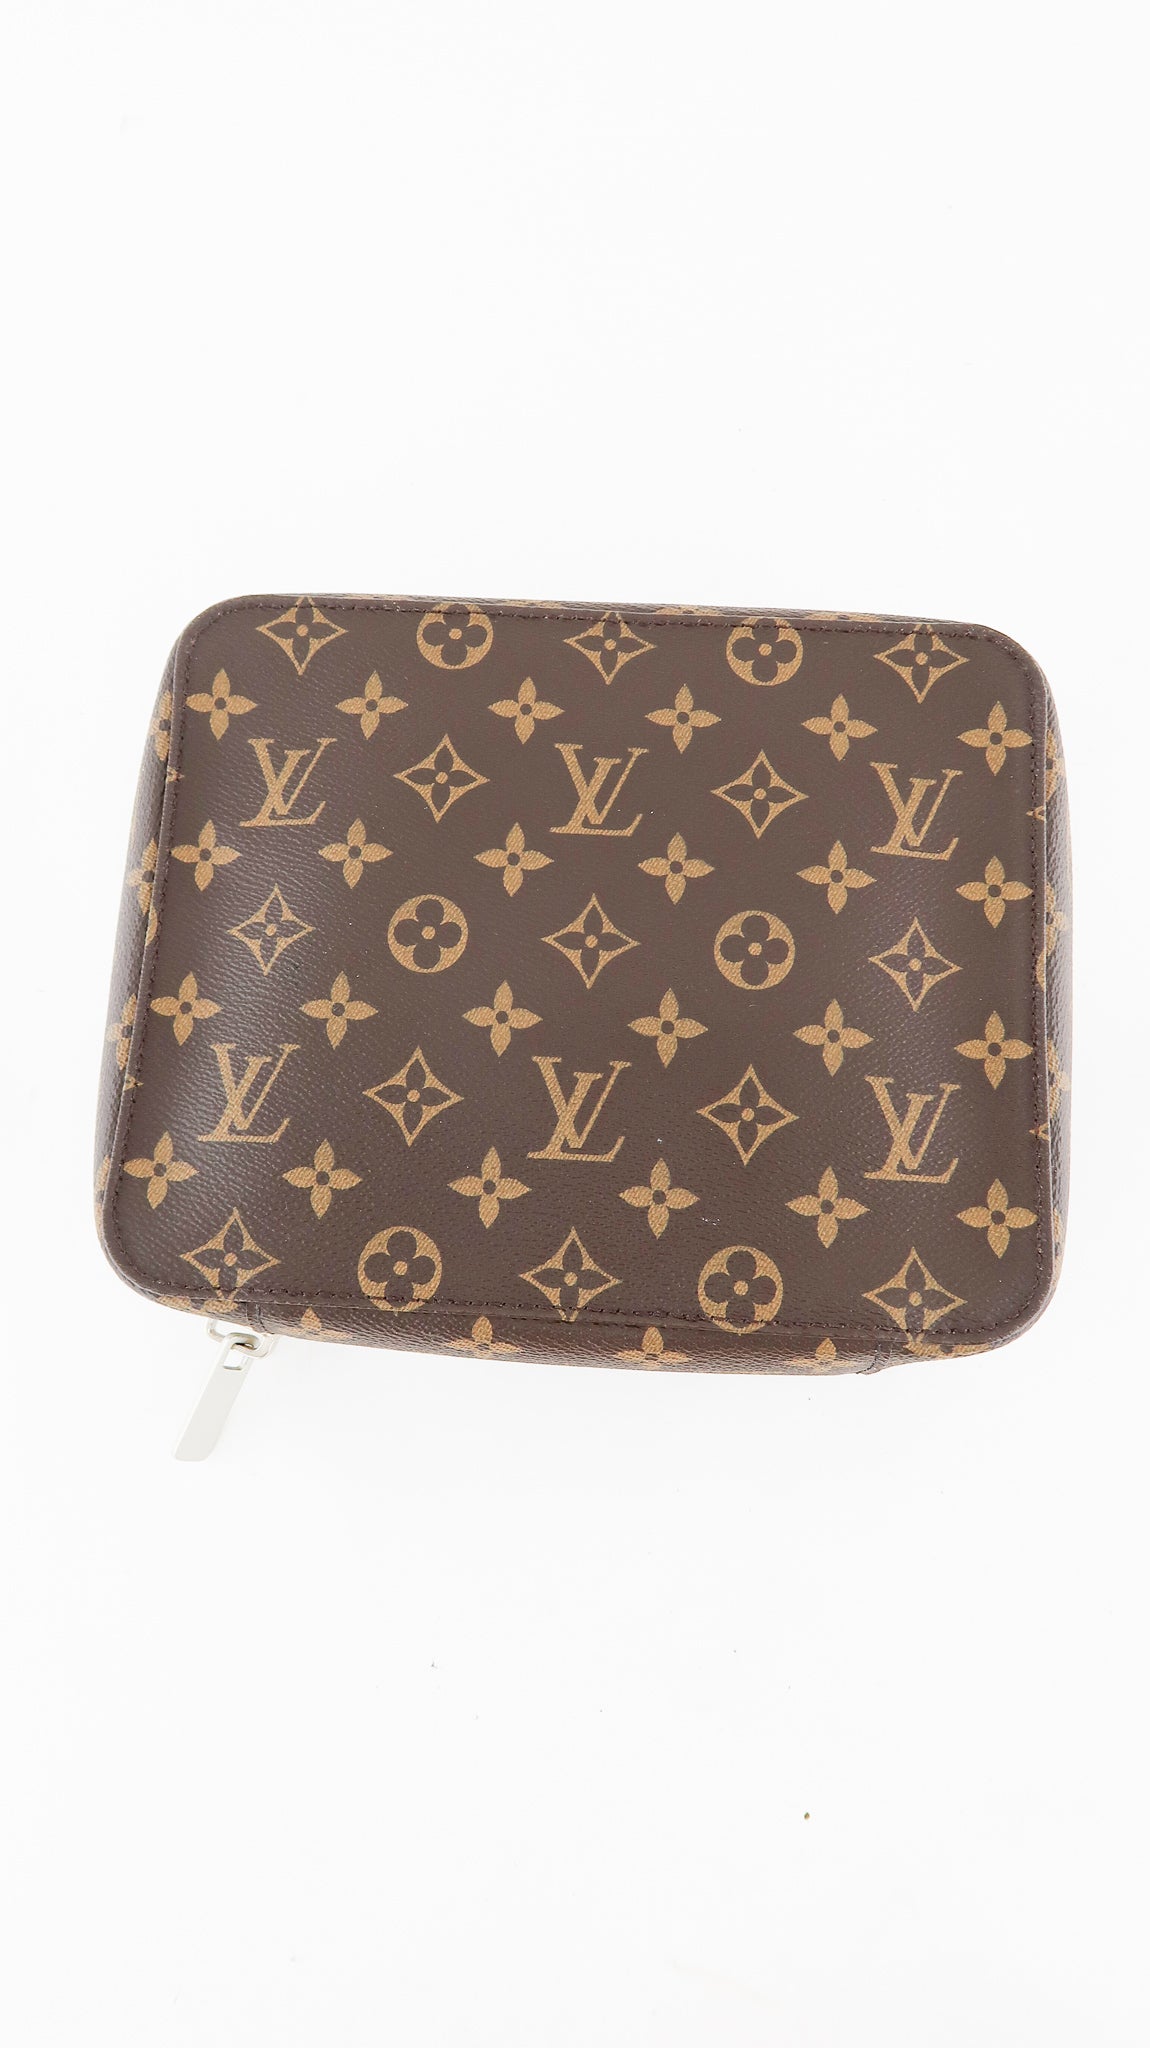 Louis Vuitton: “Securely packs the most fragile objects. Specializing in  packing fashions. - News from All Diamond